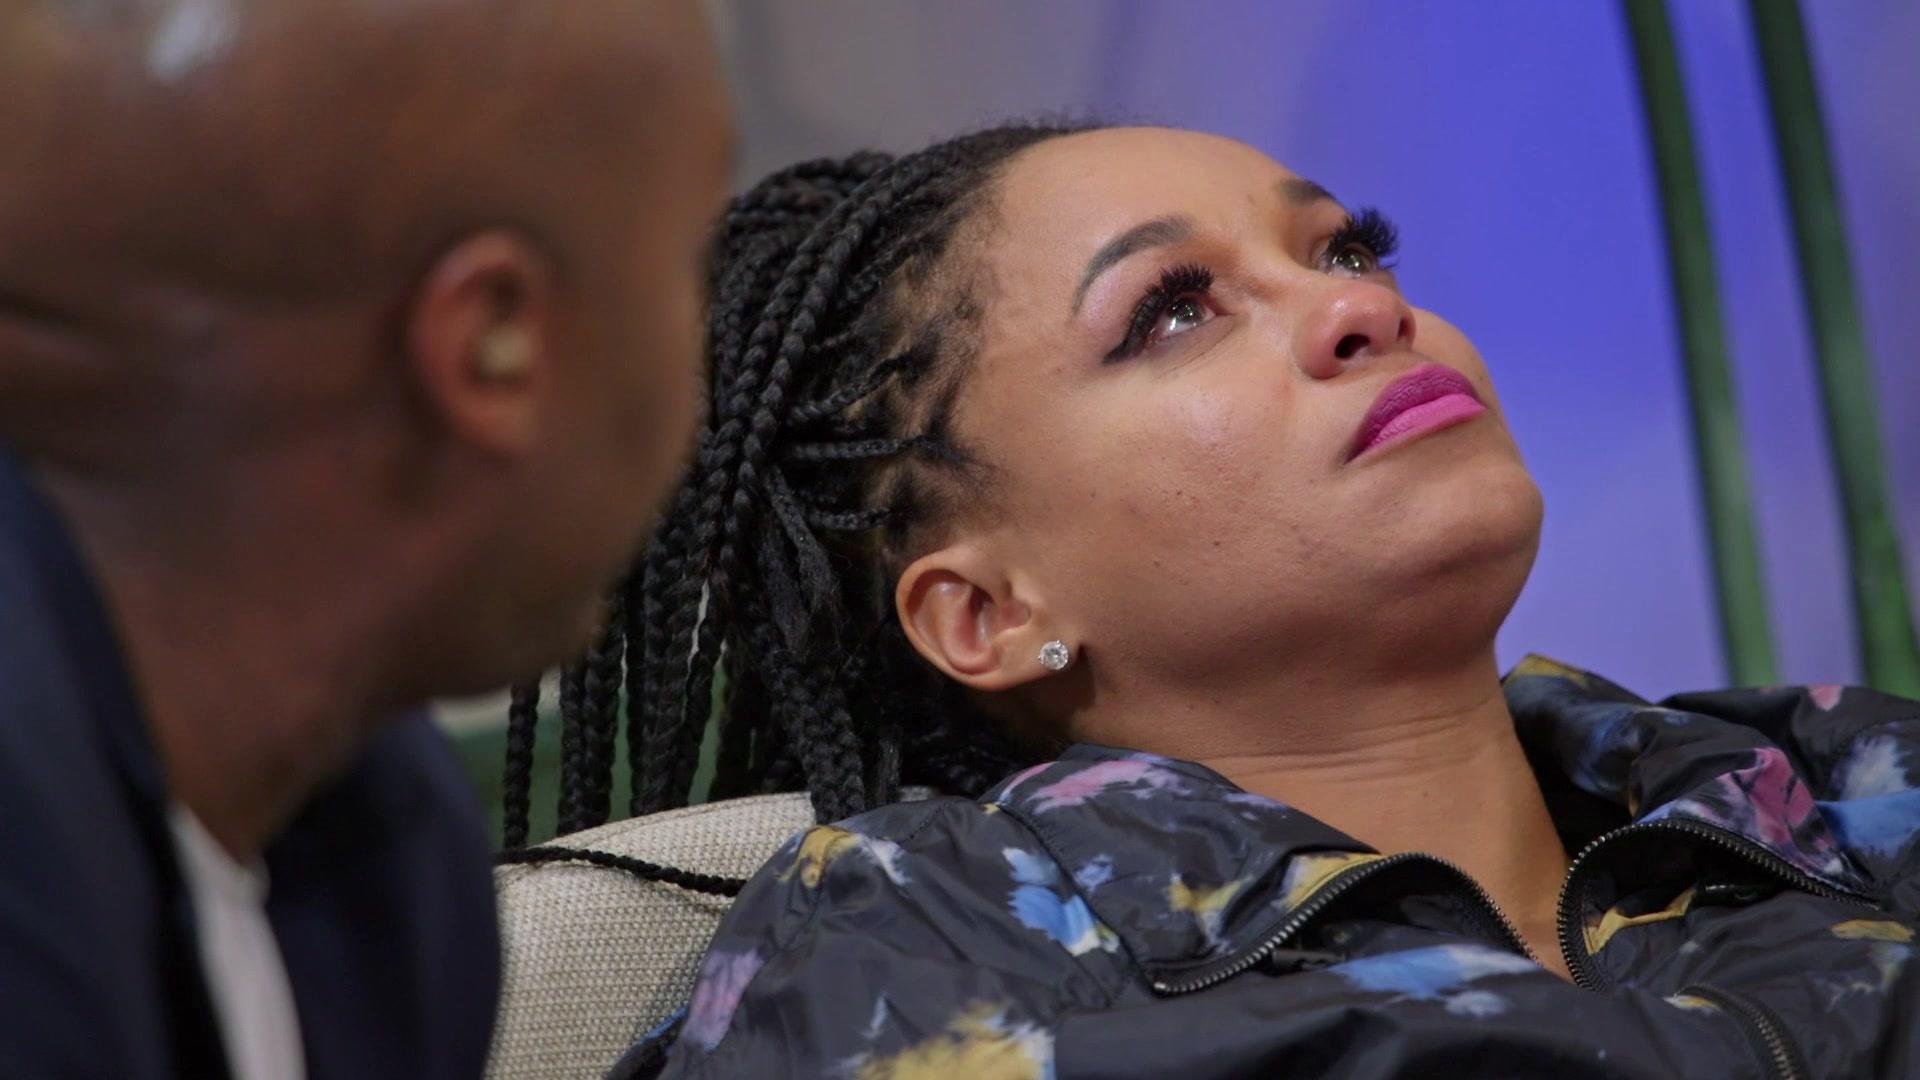 Watch Tahiry Breaks Down After Vado's Attack | Marriage Boot Camp: Hip Hop Edition Video Extras